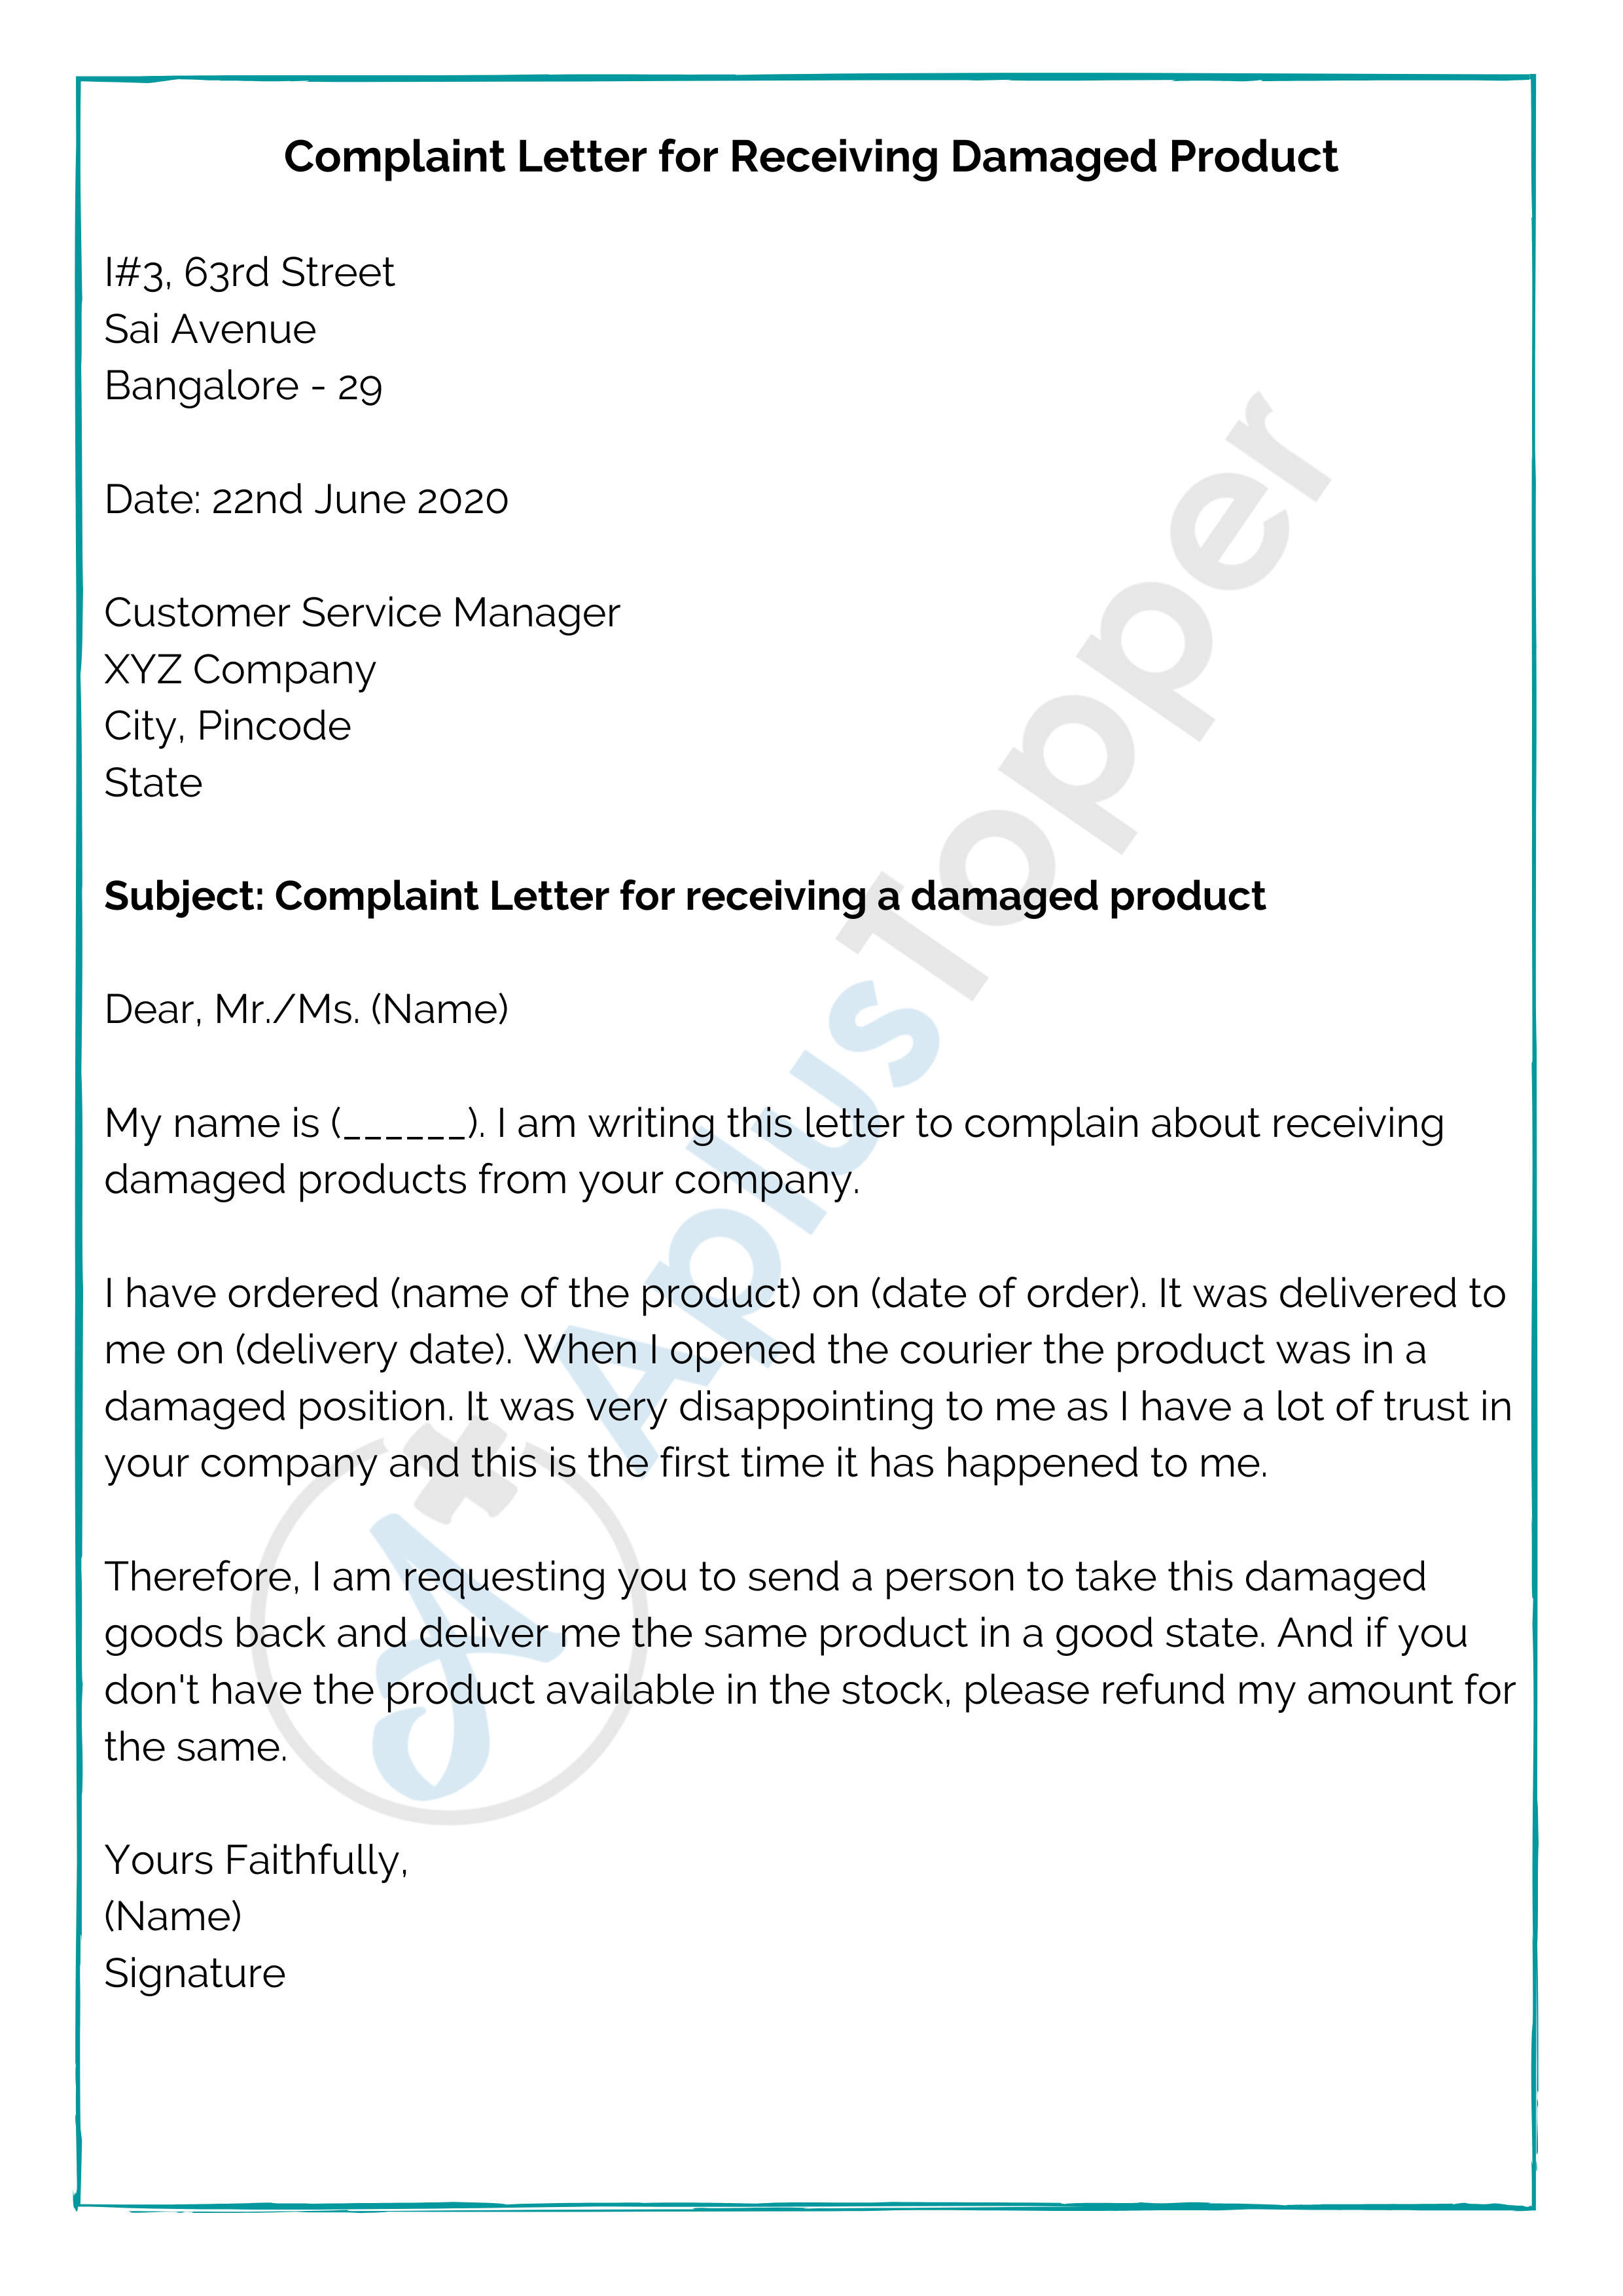 Complaint Letter Format  Samples, How to Write a Complaint Letter